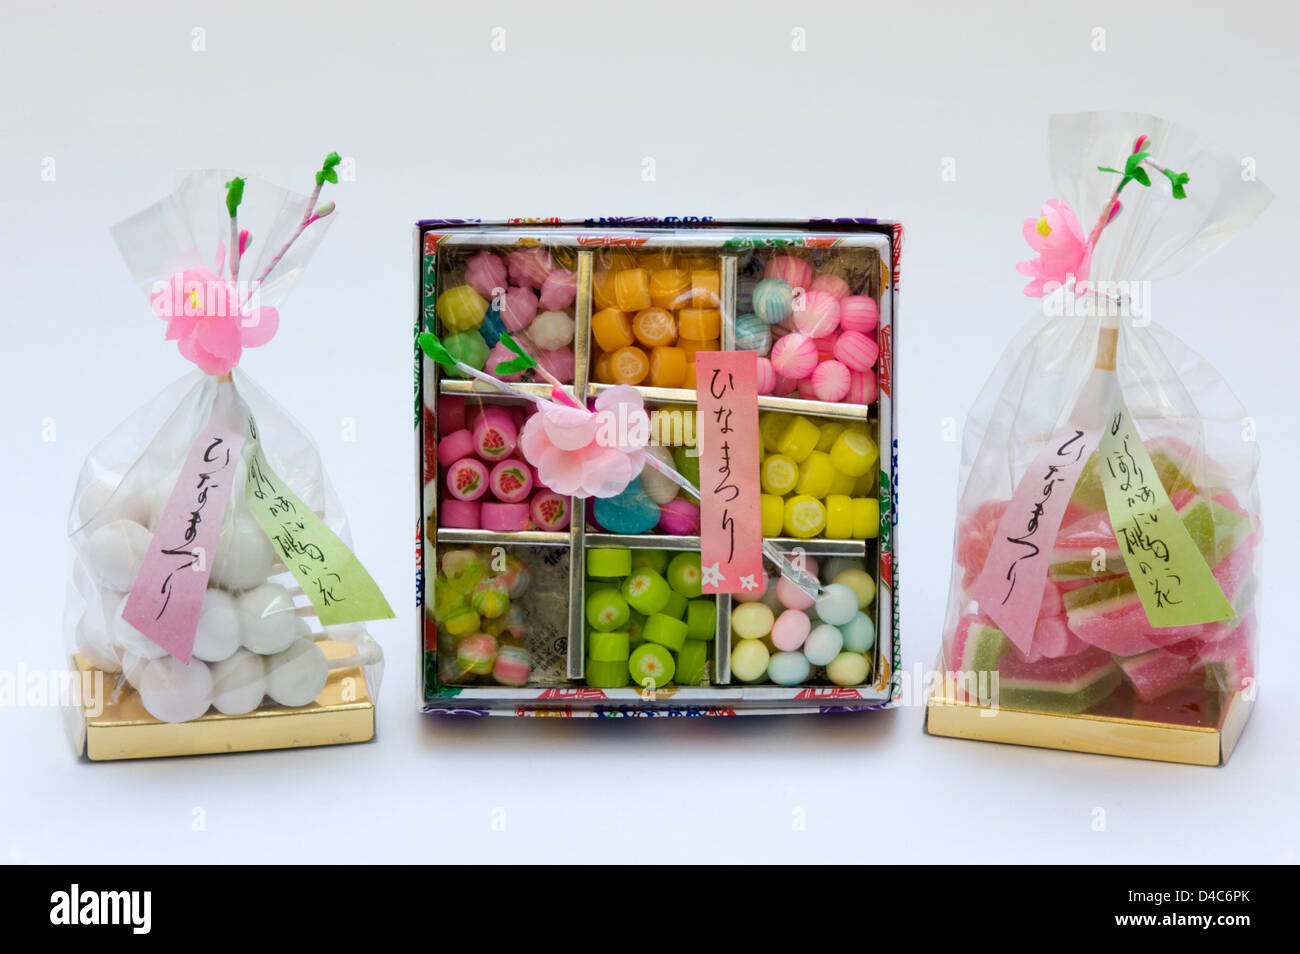 Colorful Hina Matsuri (Japanese Hina doll festival) candy, sweets and other snacks that are enjoyed on Hina Festival in March. Stock Photo